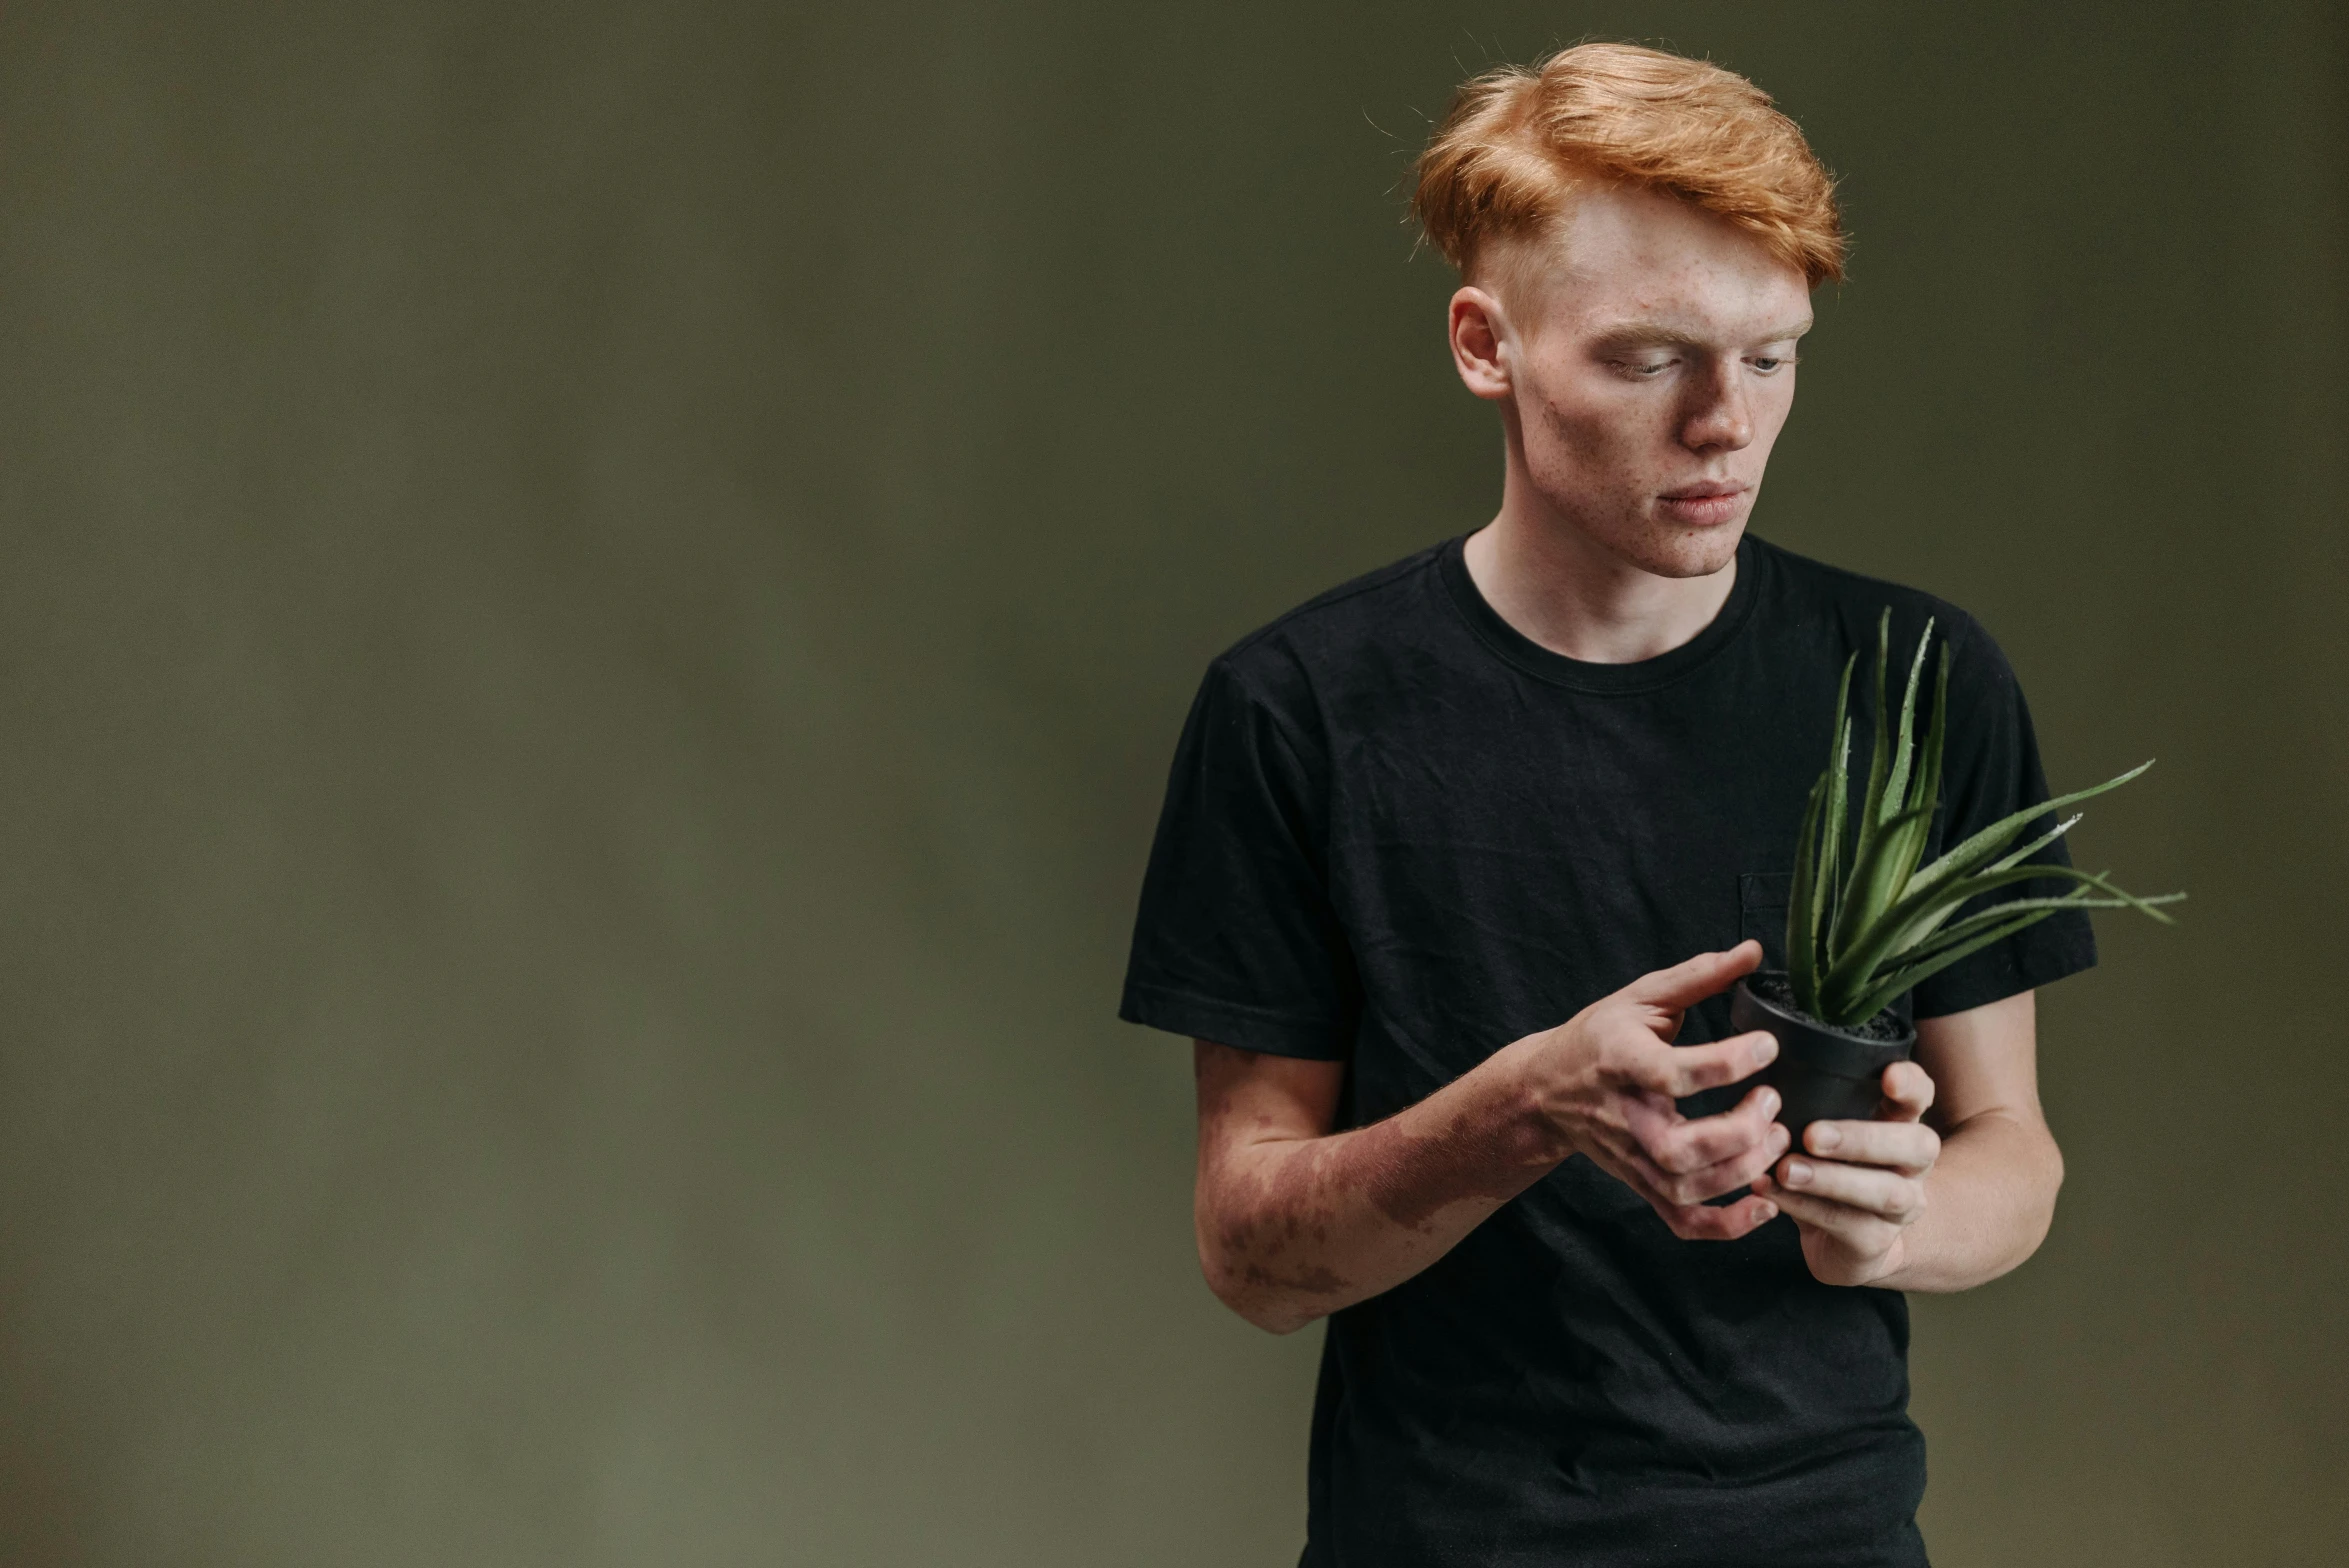 a man in a black shirt holding a potted plant, pexels contest winner, red haired teen boy, ignant, pale and sickly, product introduction photo